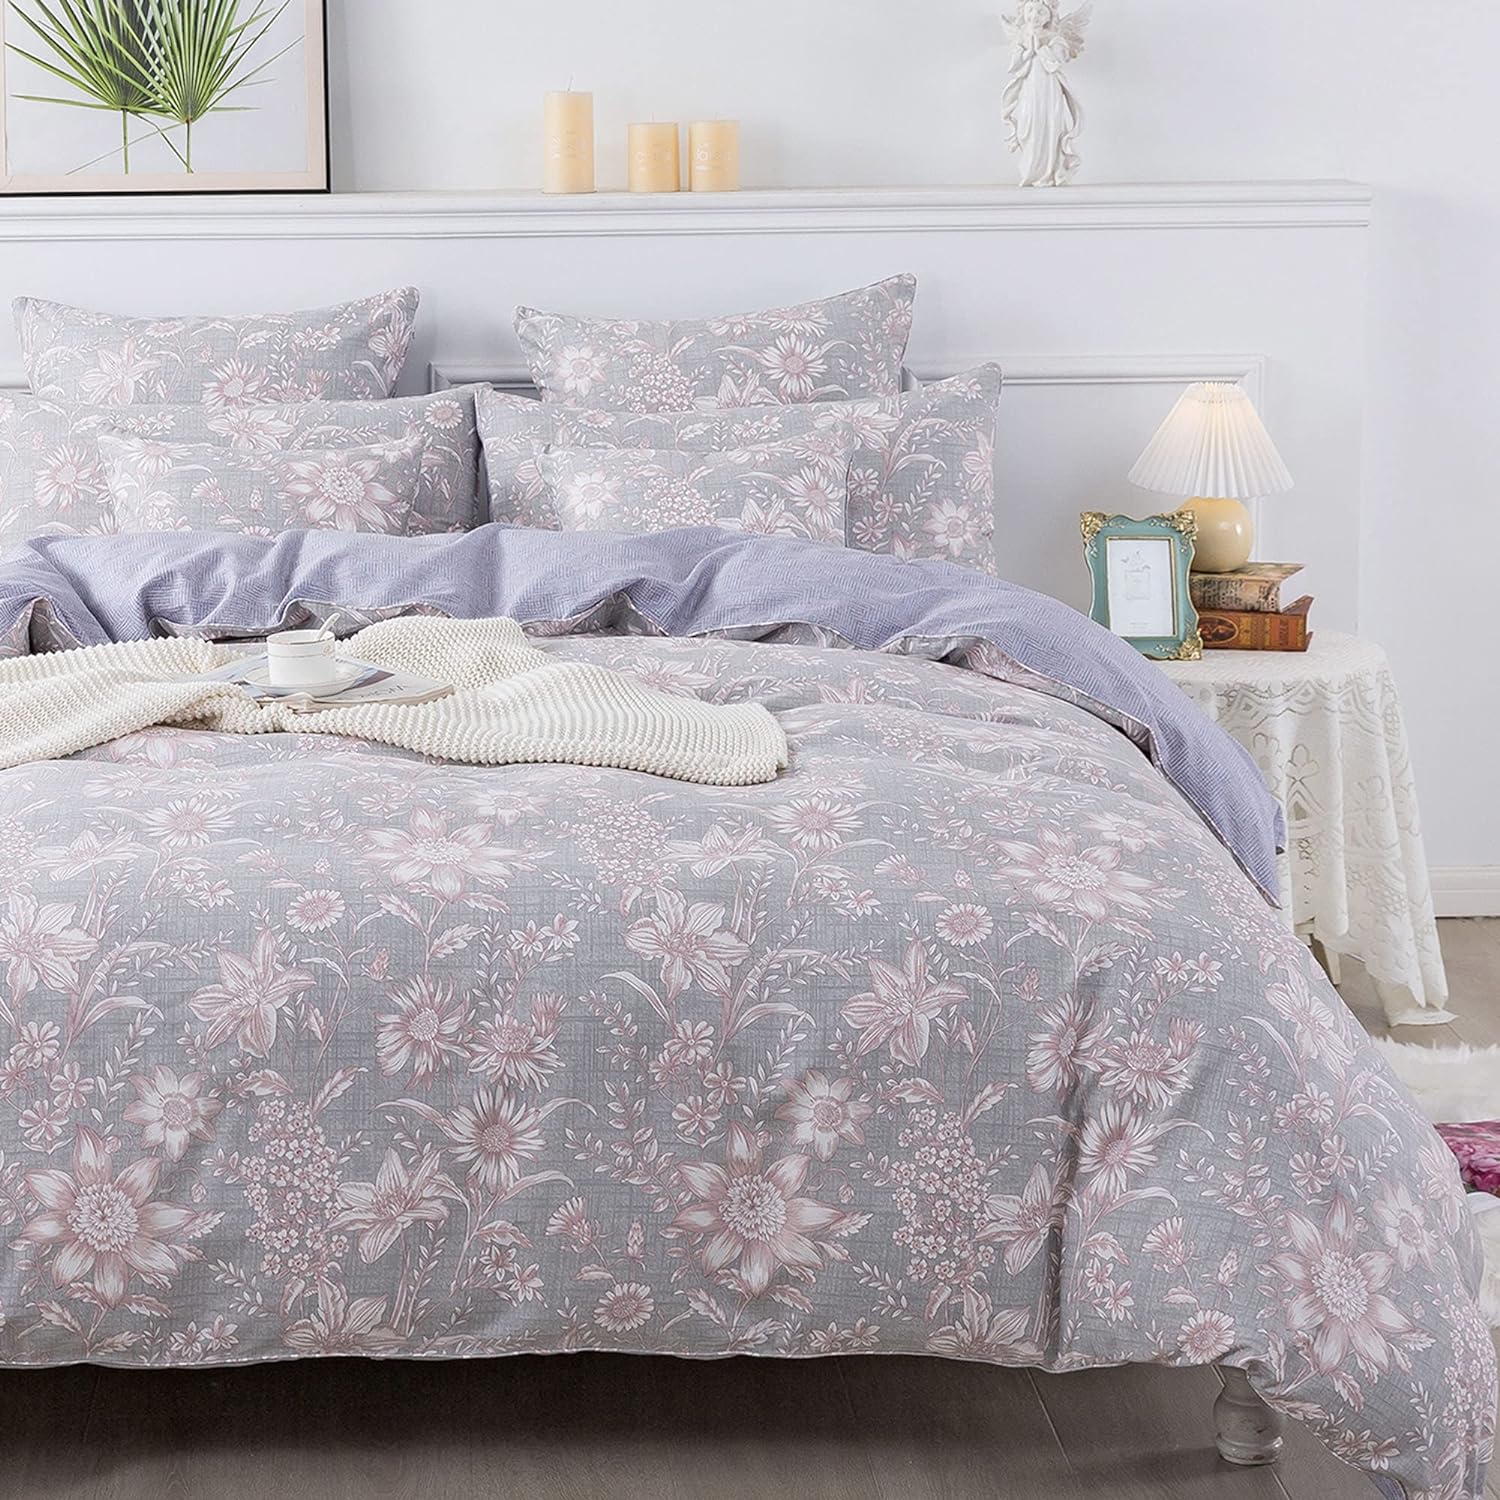 FADFAY Duvet Cover Set Twin Shabby Pink and Grey Floral Bedding Vintage Sunflower Bedding 600TC Elegant Summer Bedding 100% Cotton Soft Comforter Cover with Hidden Zipper Closure 3Pcs, Twin Size